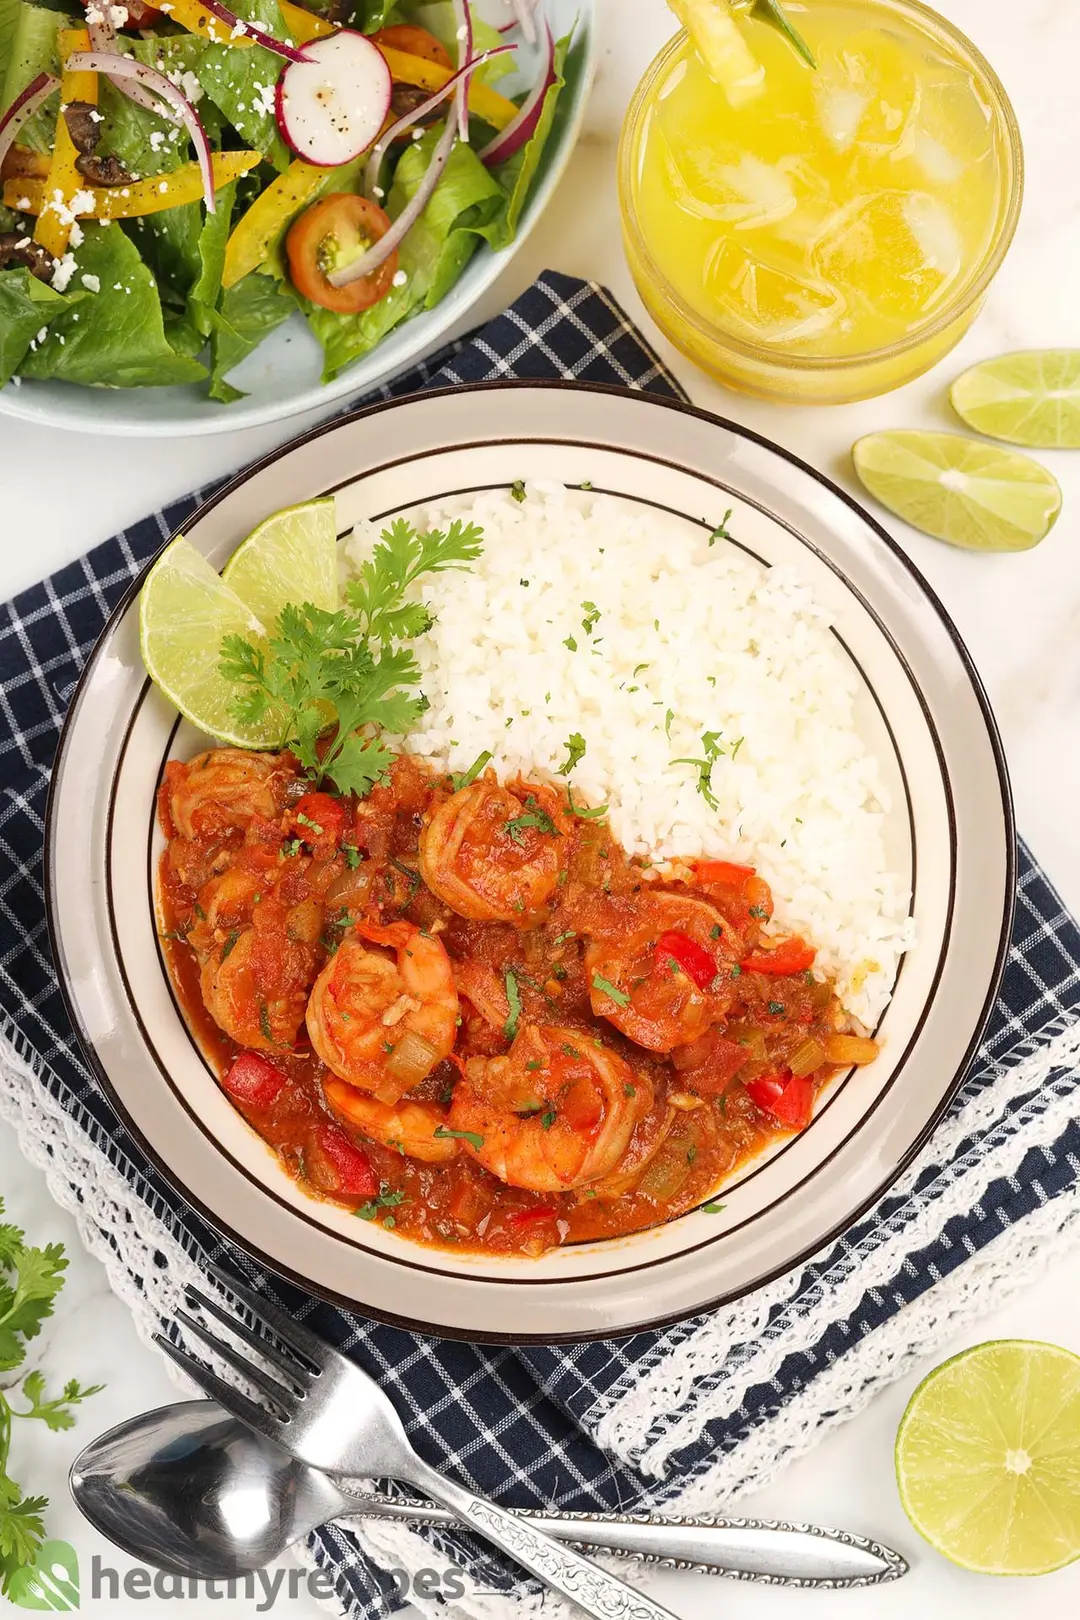 How to Store and Reheat Shrimp Creole